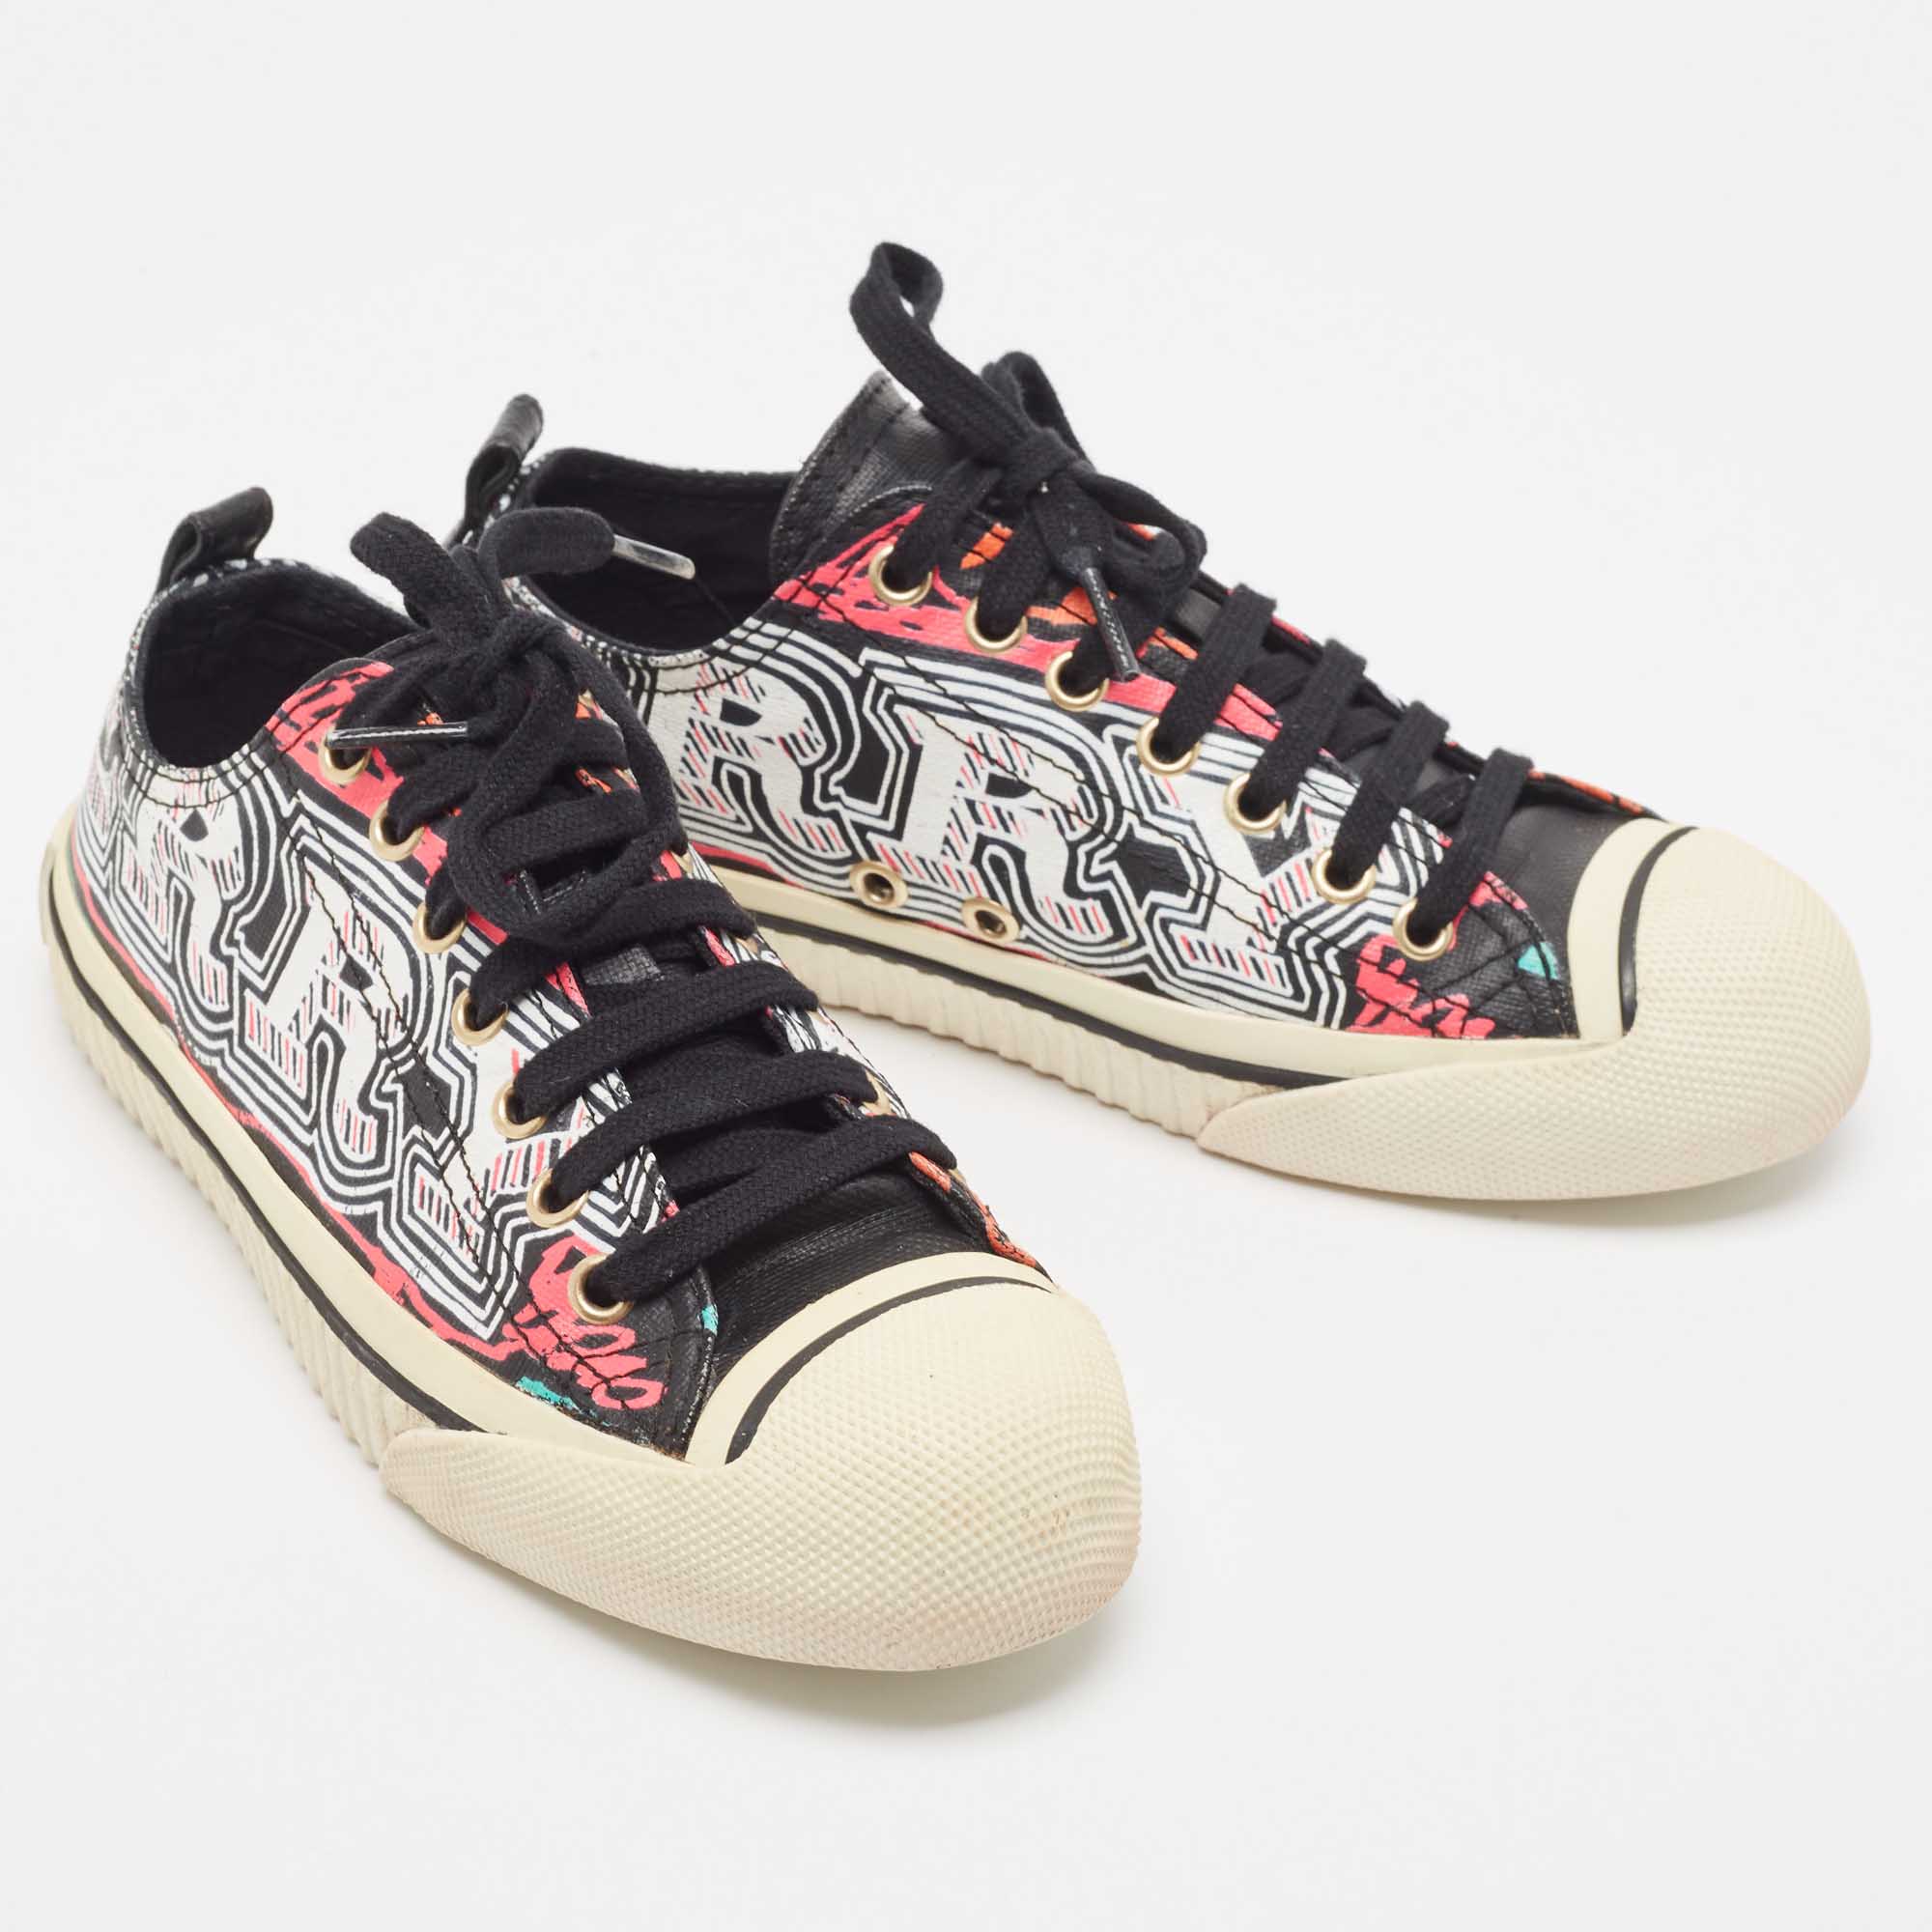 Burberry Multicolor Coated Canvas Kingly Mark Print Low Top Sneakers Size 35